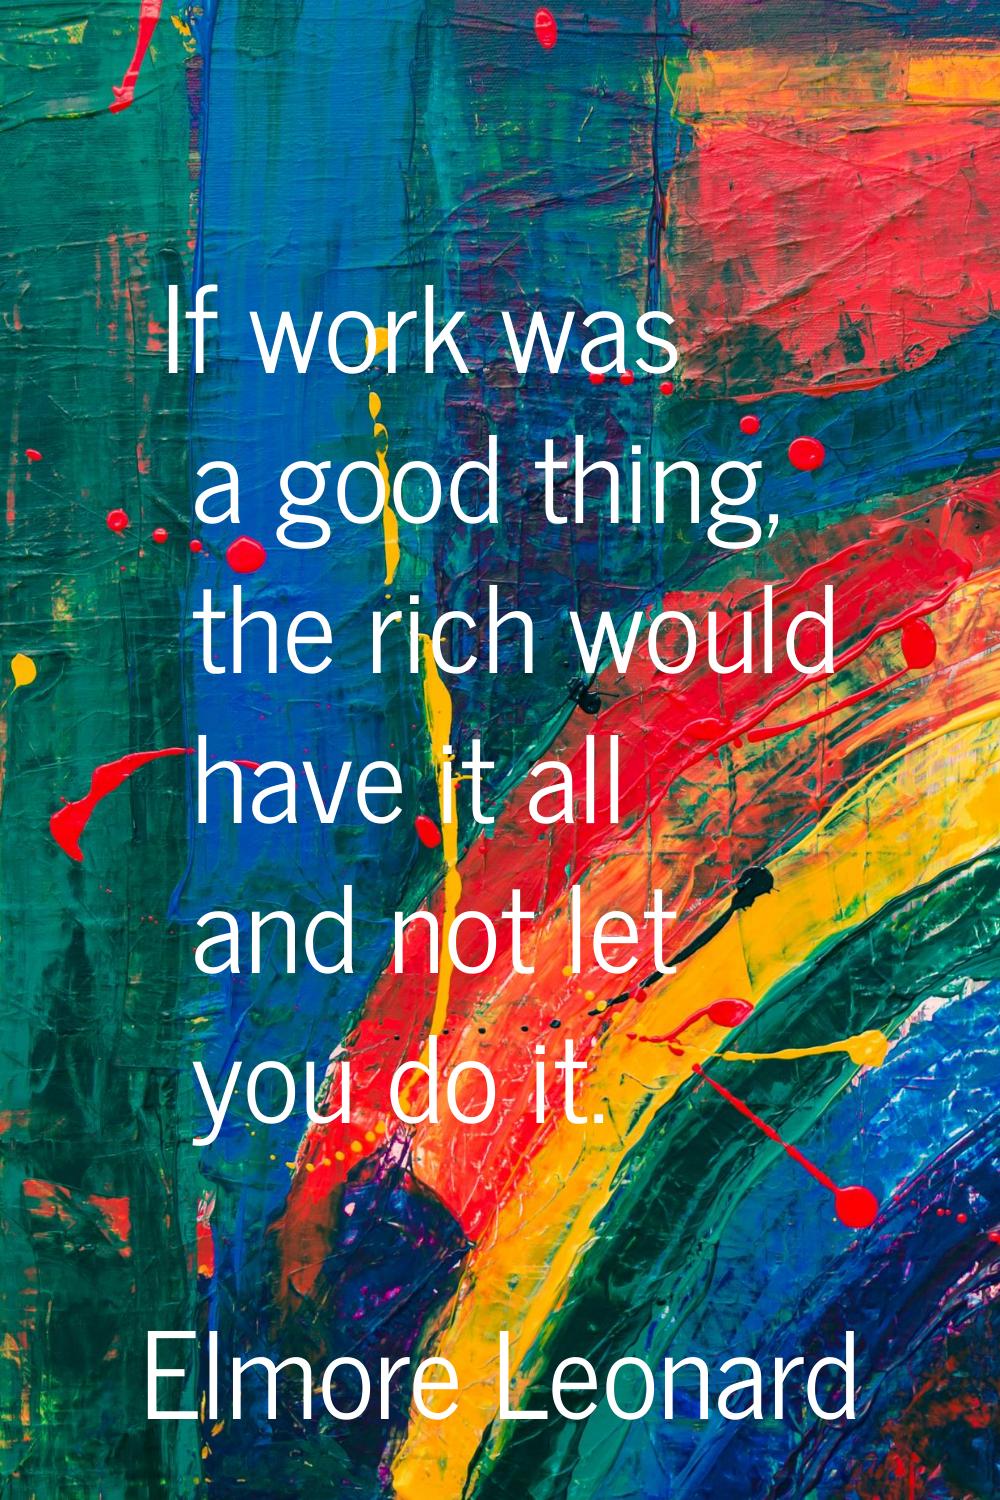 If work was a good thing, the rich would have it all and not let you do it.